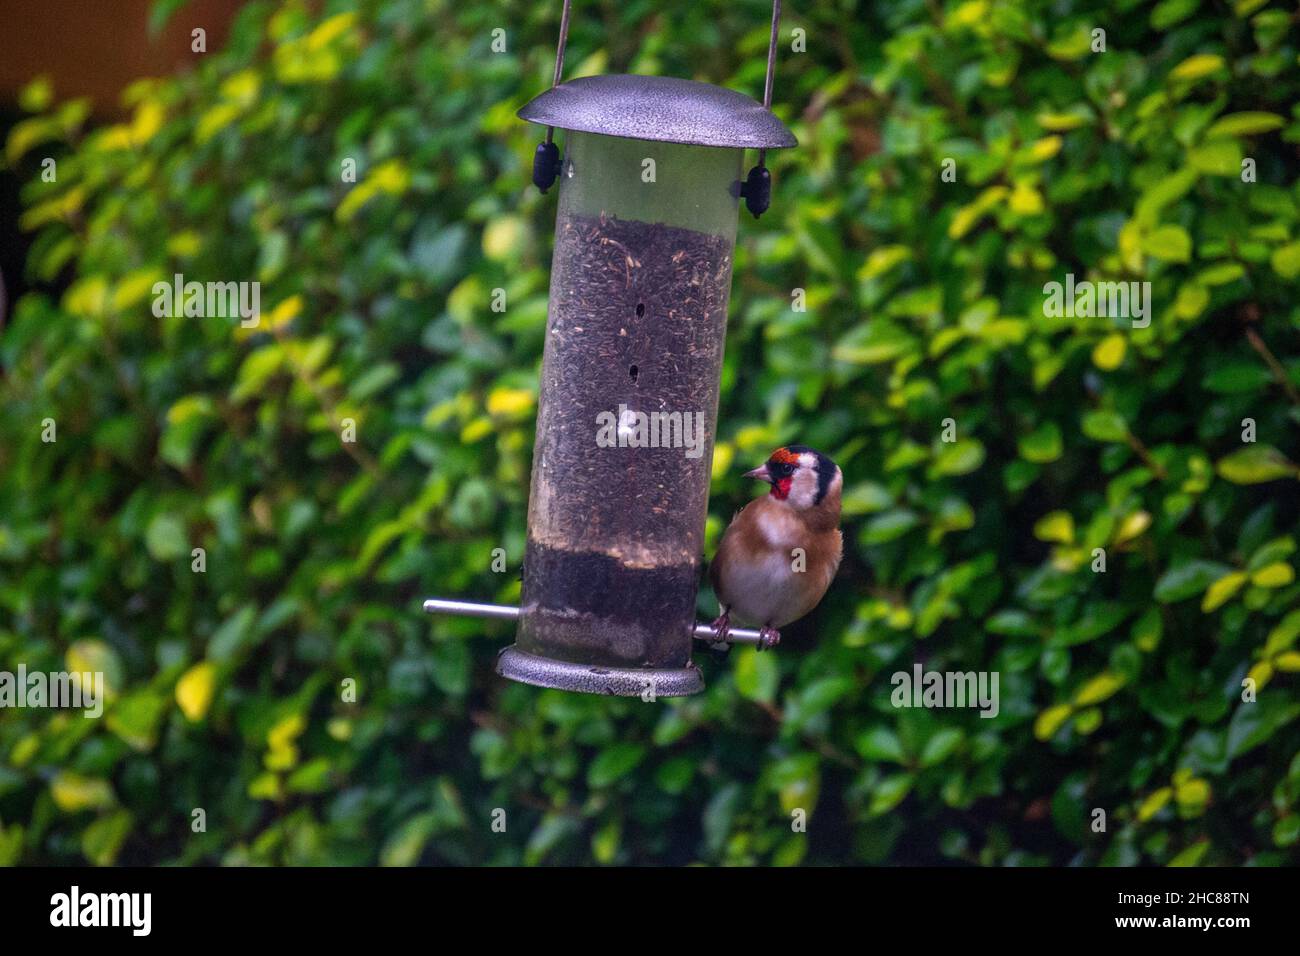 European Goldfinch (Carduelis Carduelis) perched on Bird feeder filled with Niger seed. Stock Photo